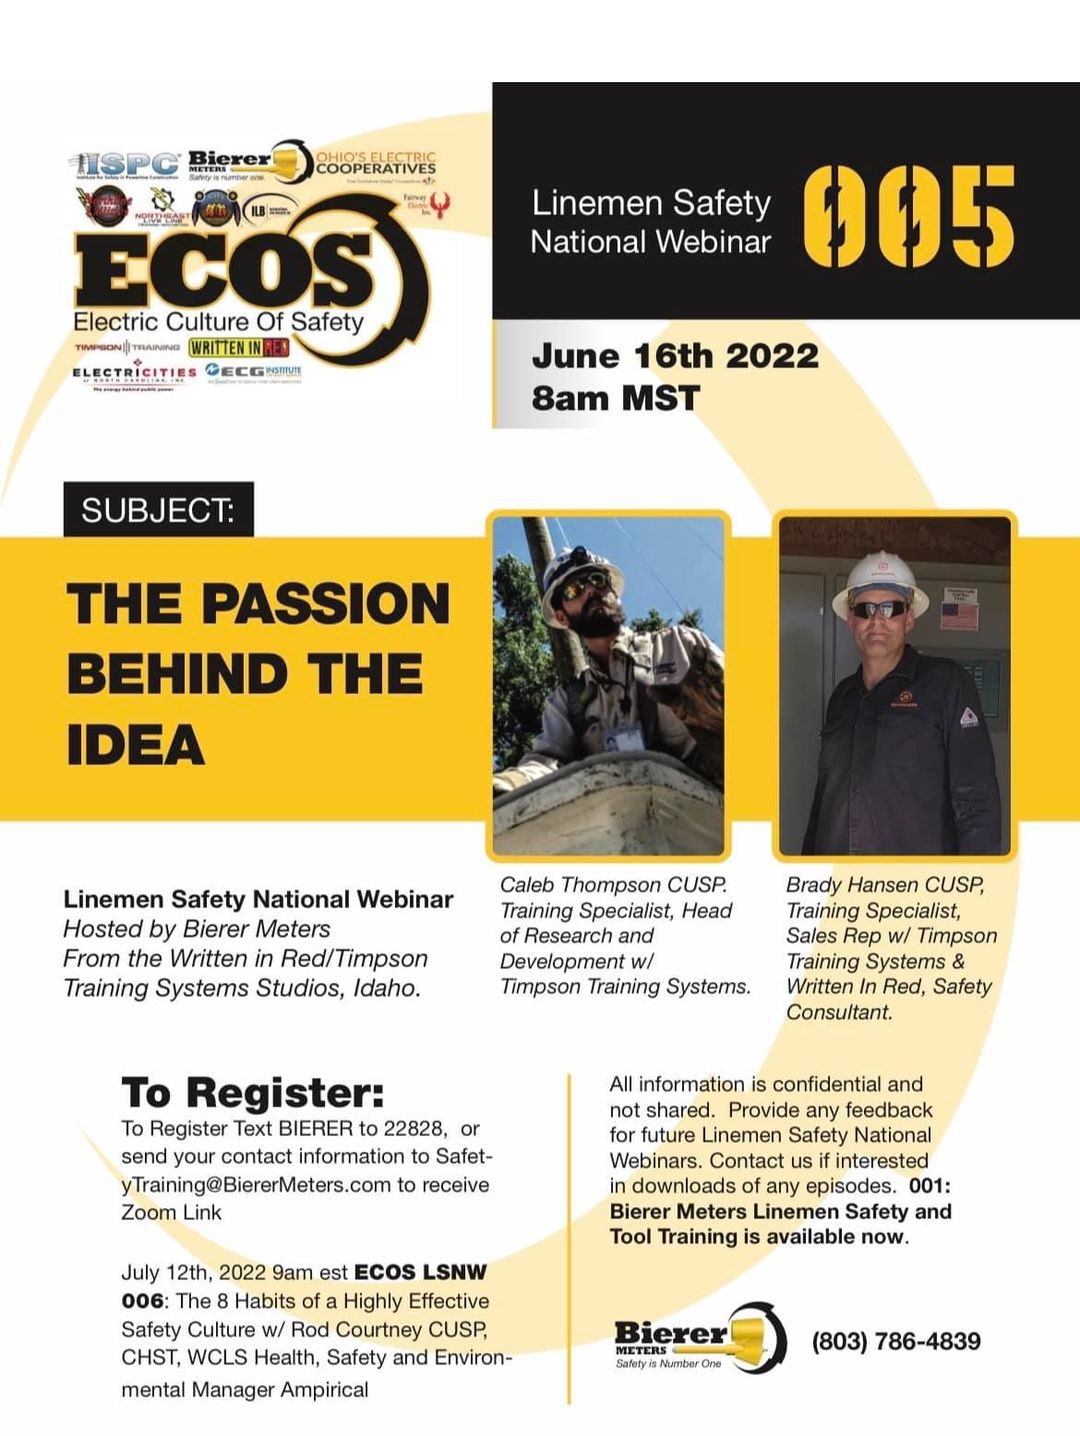 Lineman Safety Webinar 005: The Passion Behind the Idea – ECOS